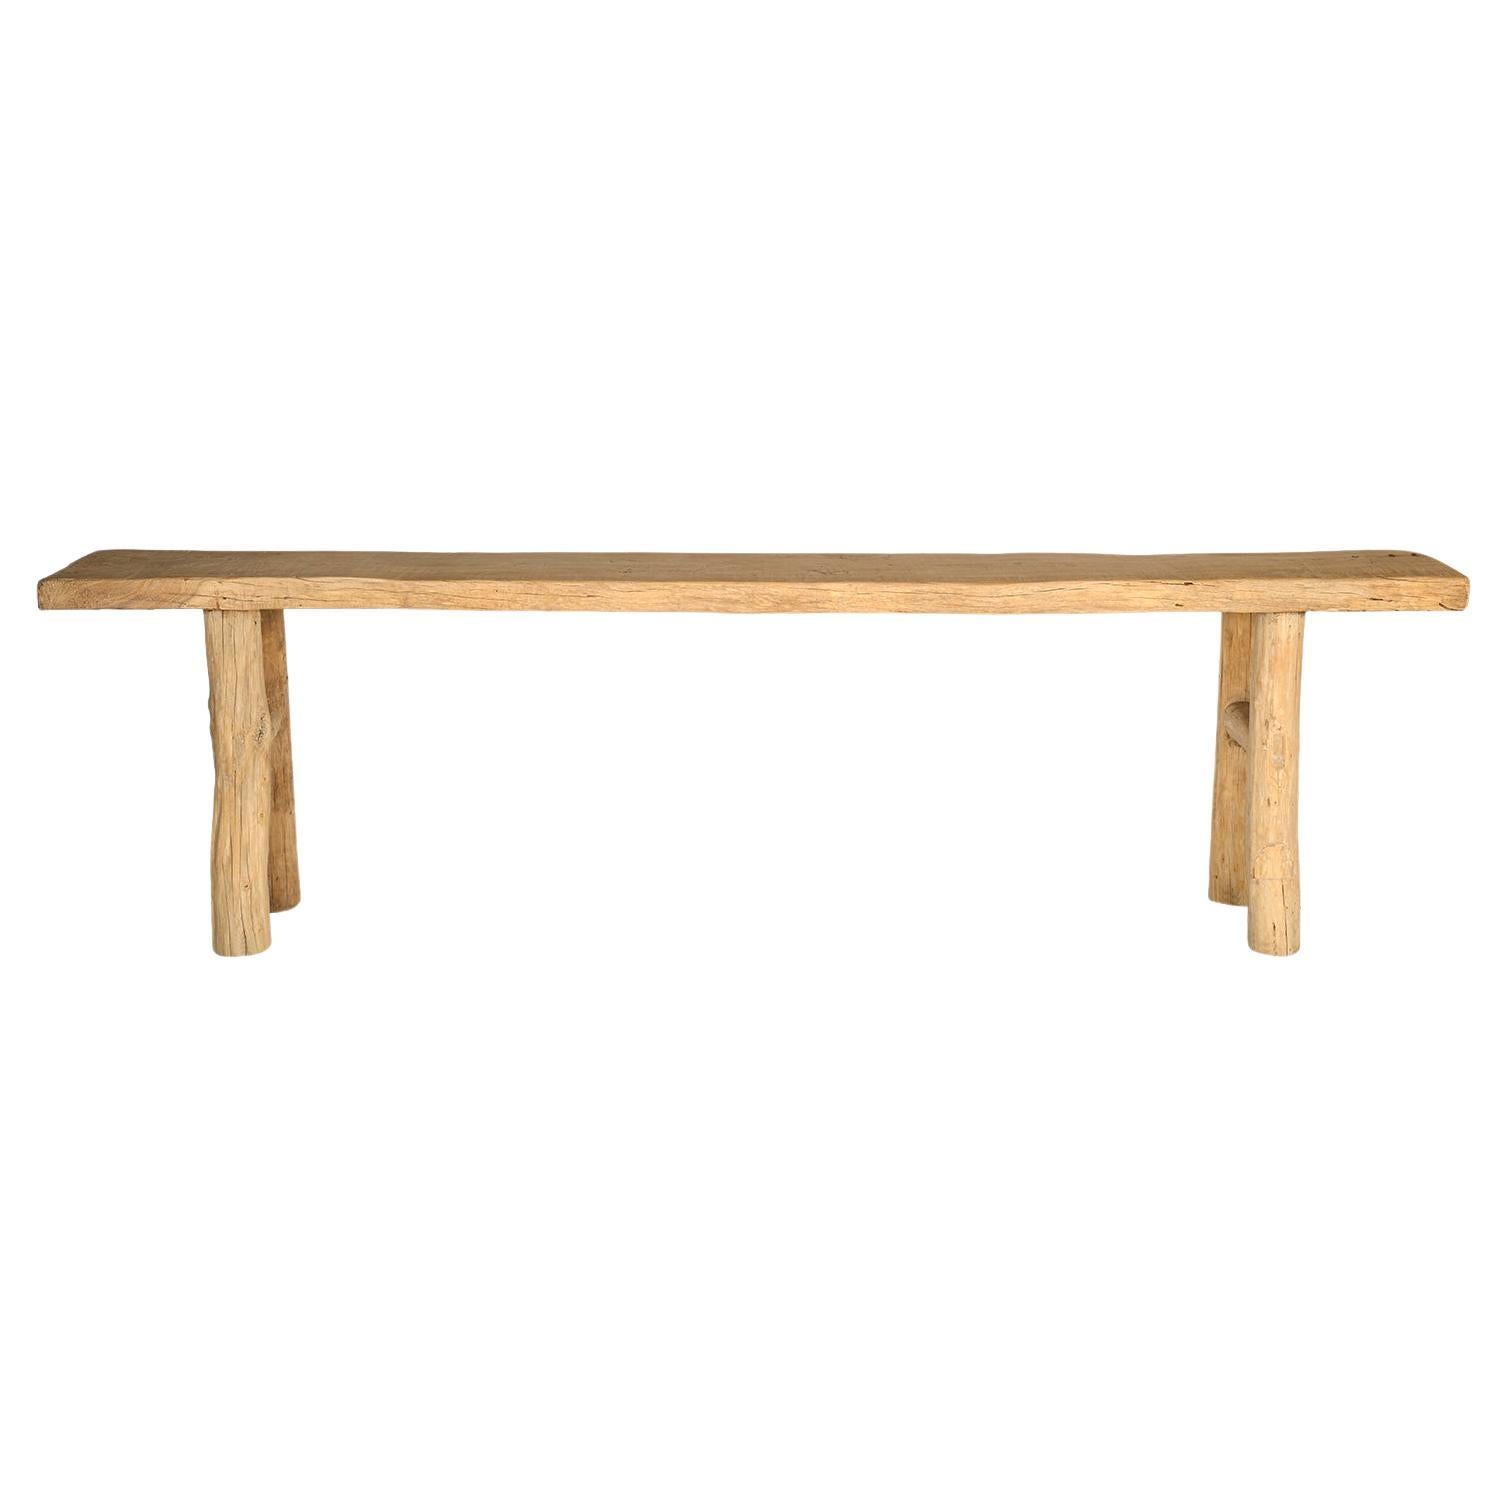 Provincial Serving Table in Reclaimed lm with Staple Cleat Accents For Sale